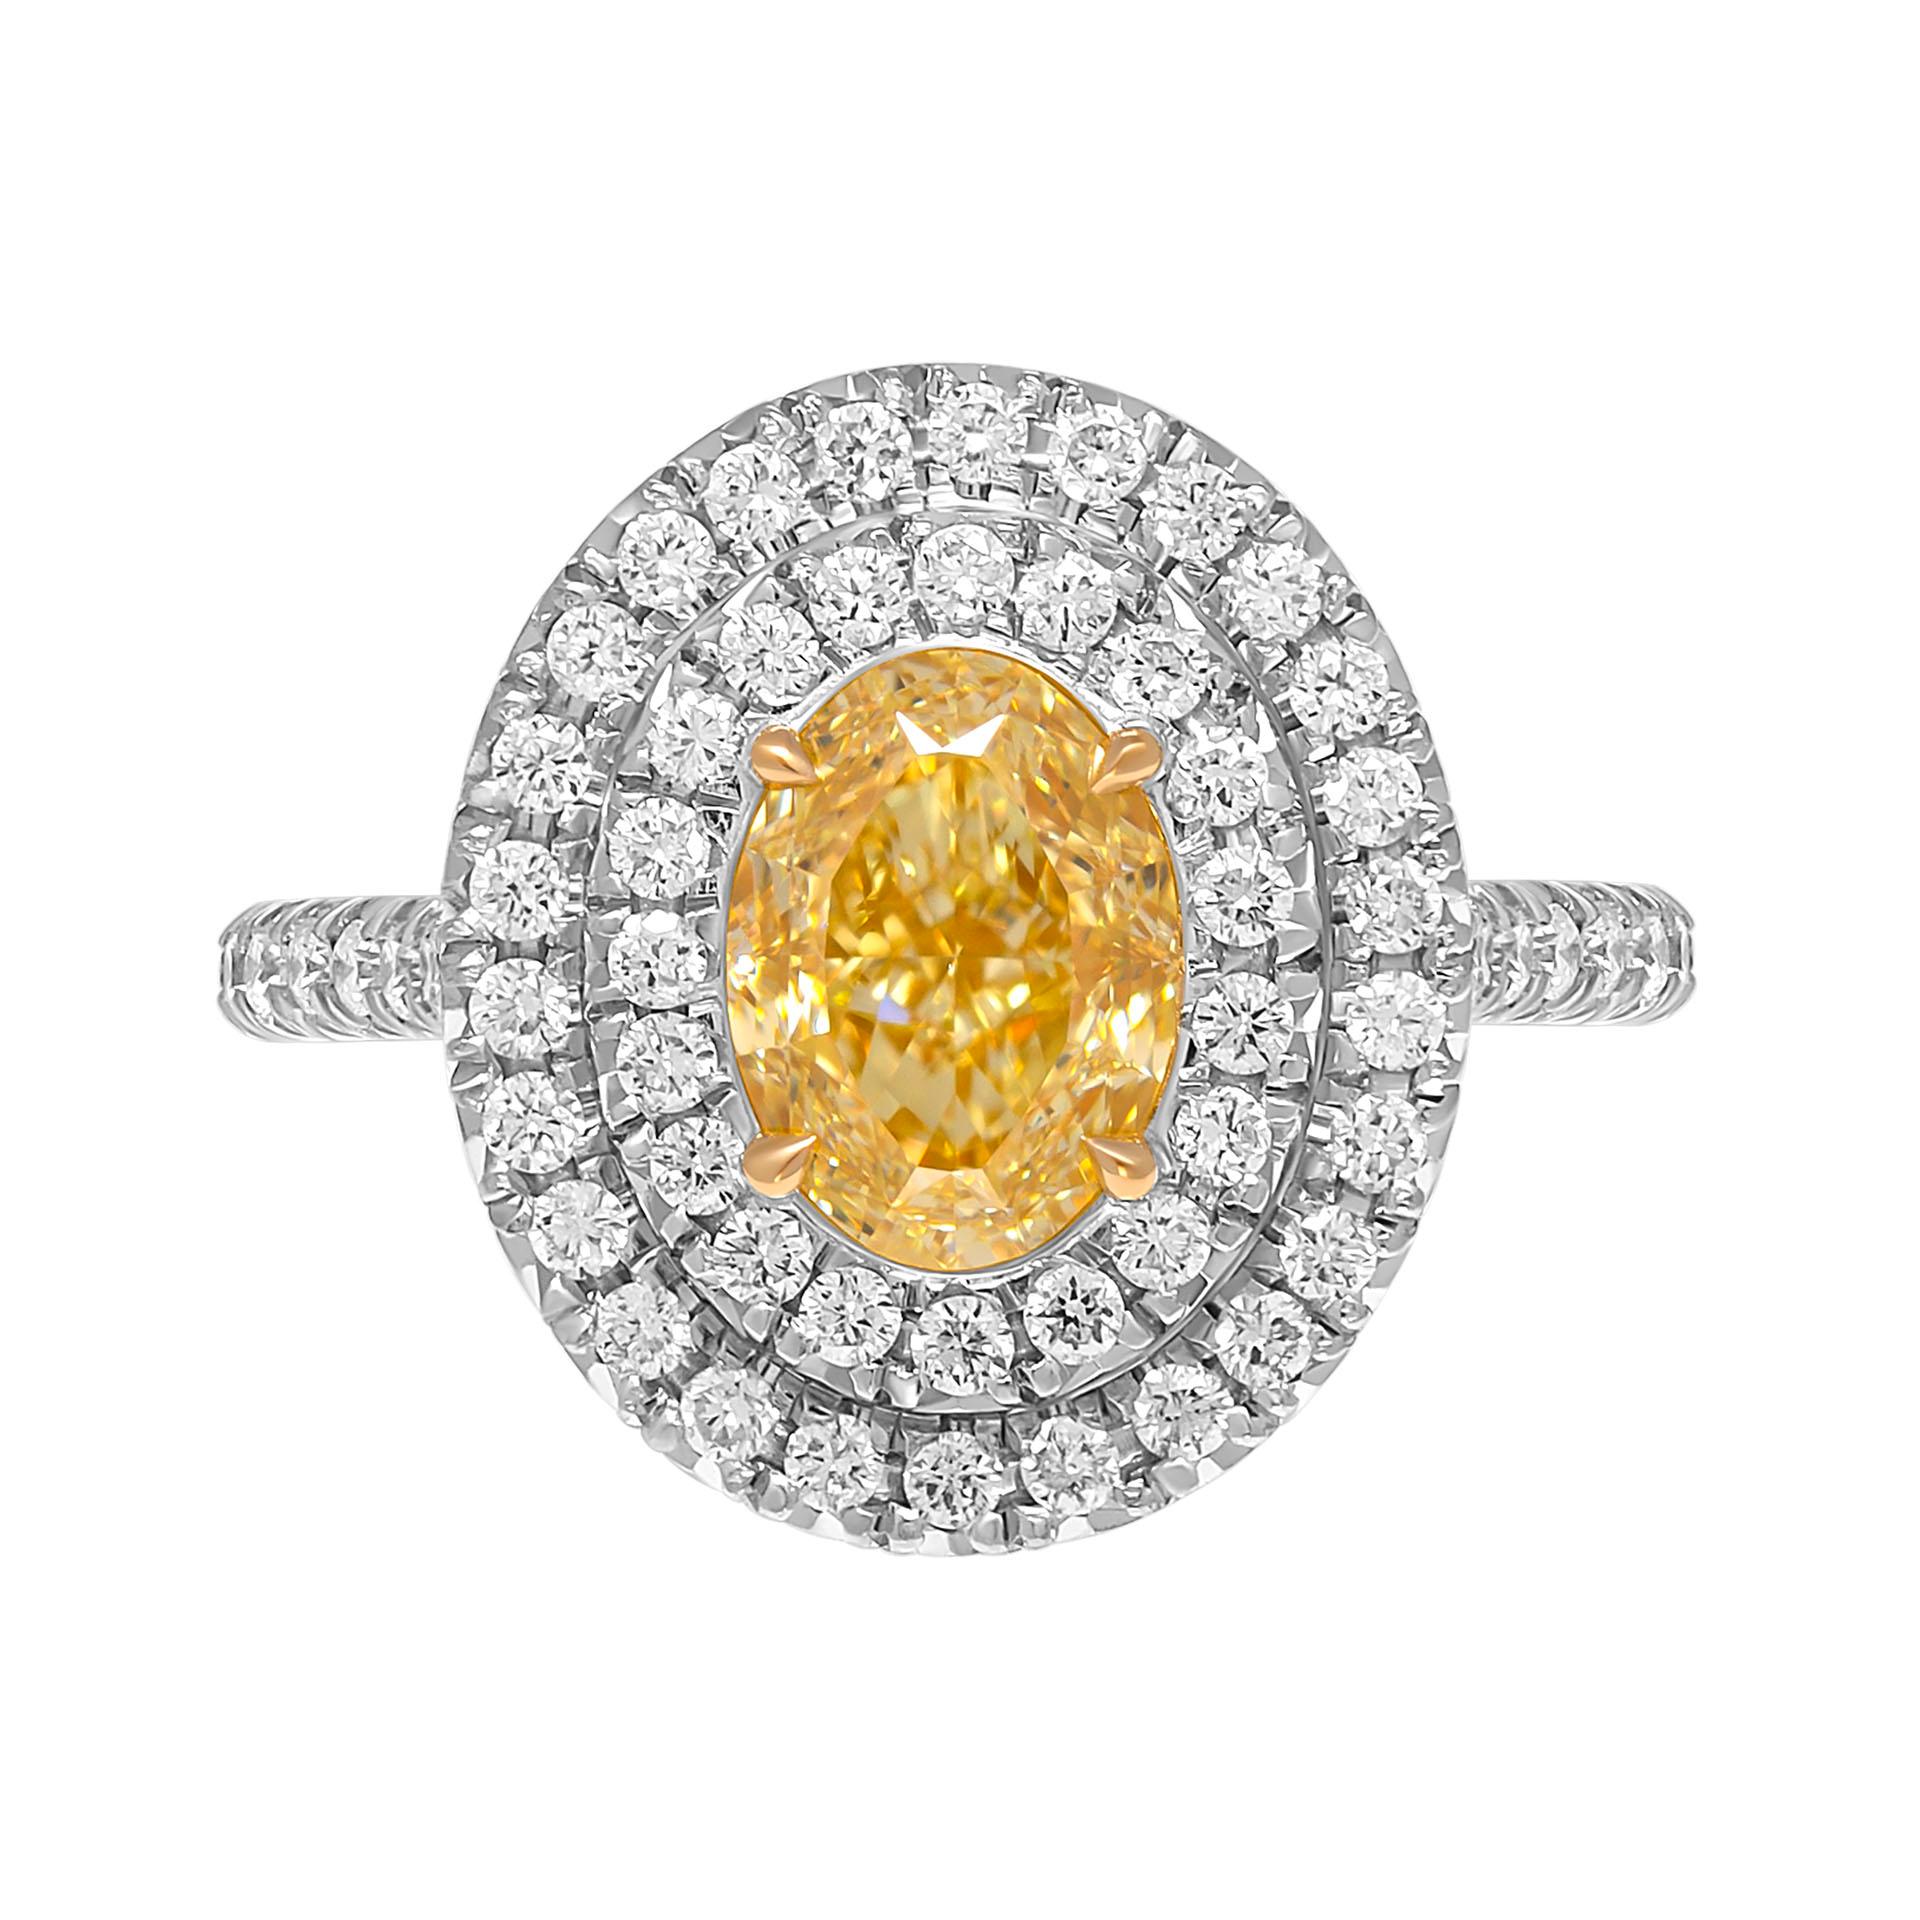 Engagement ring mounted in 18K Yellow Gold & Platinum 
Double halo &  cathedral shank encrusted with pave diamonds totaling 0.64ct F-G color and VS clarity
Center Stone: 1.65ct Natural Fancy Yellow VVS2 Oval  diamond GIA#2437752665
Size: 6 
Comes